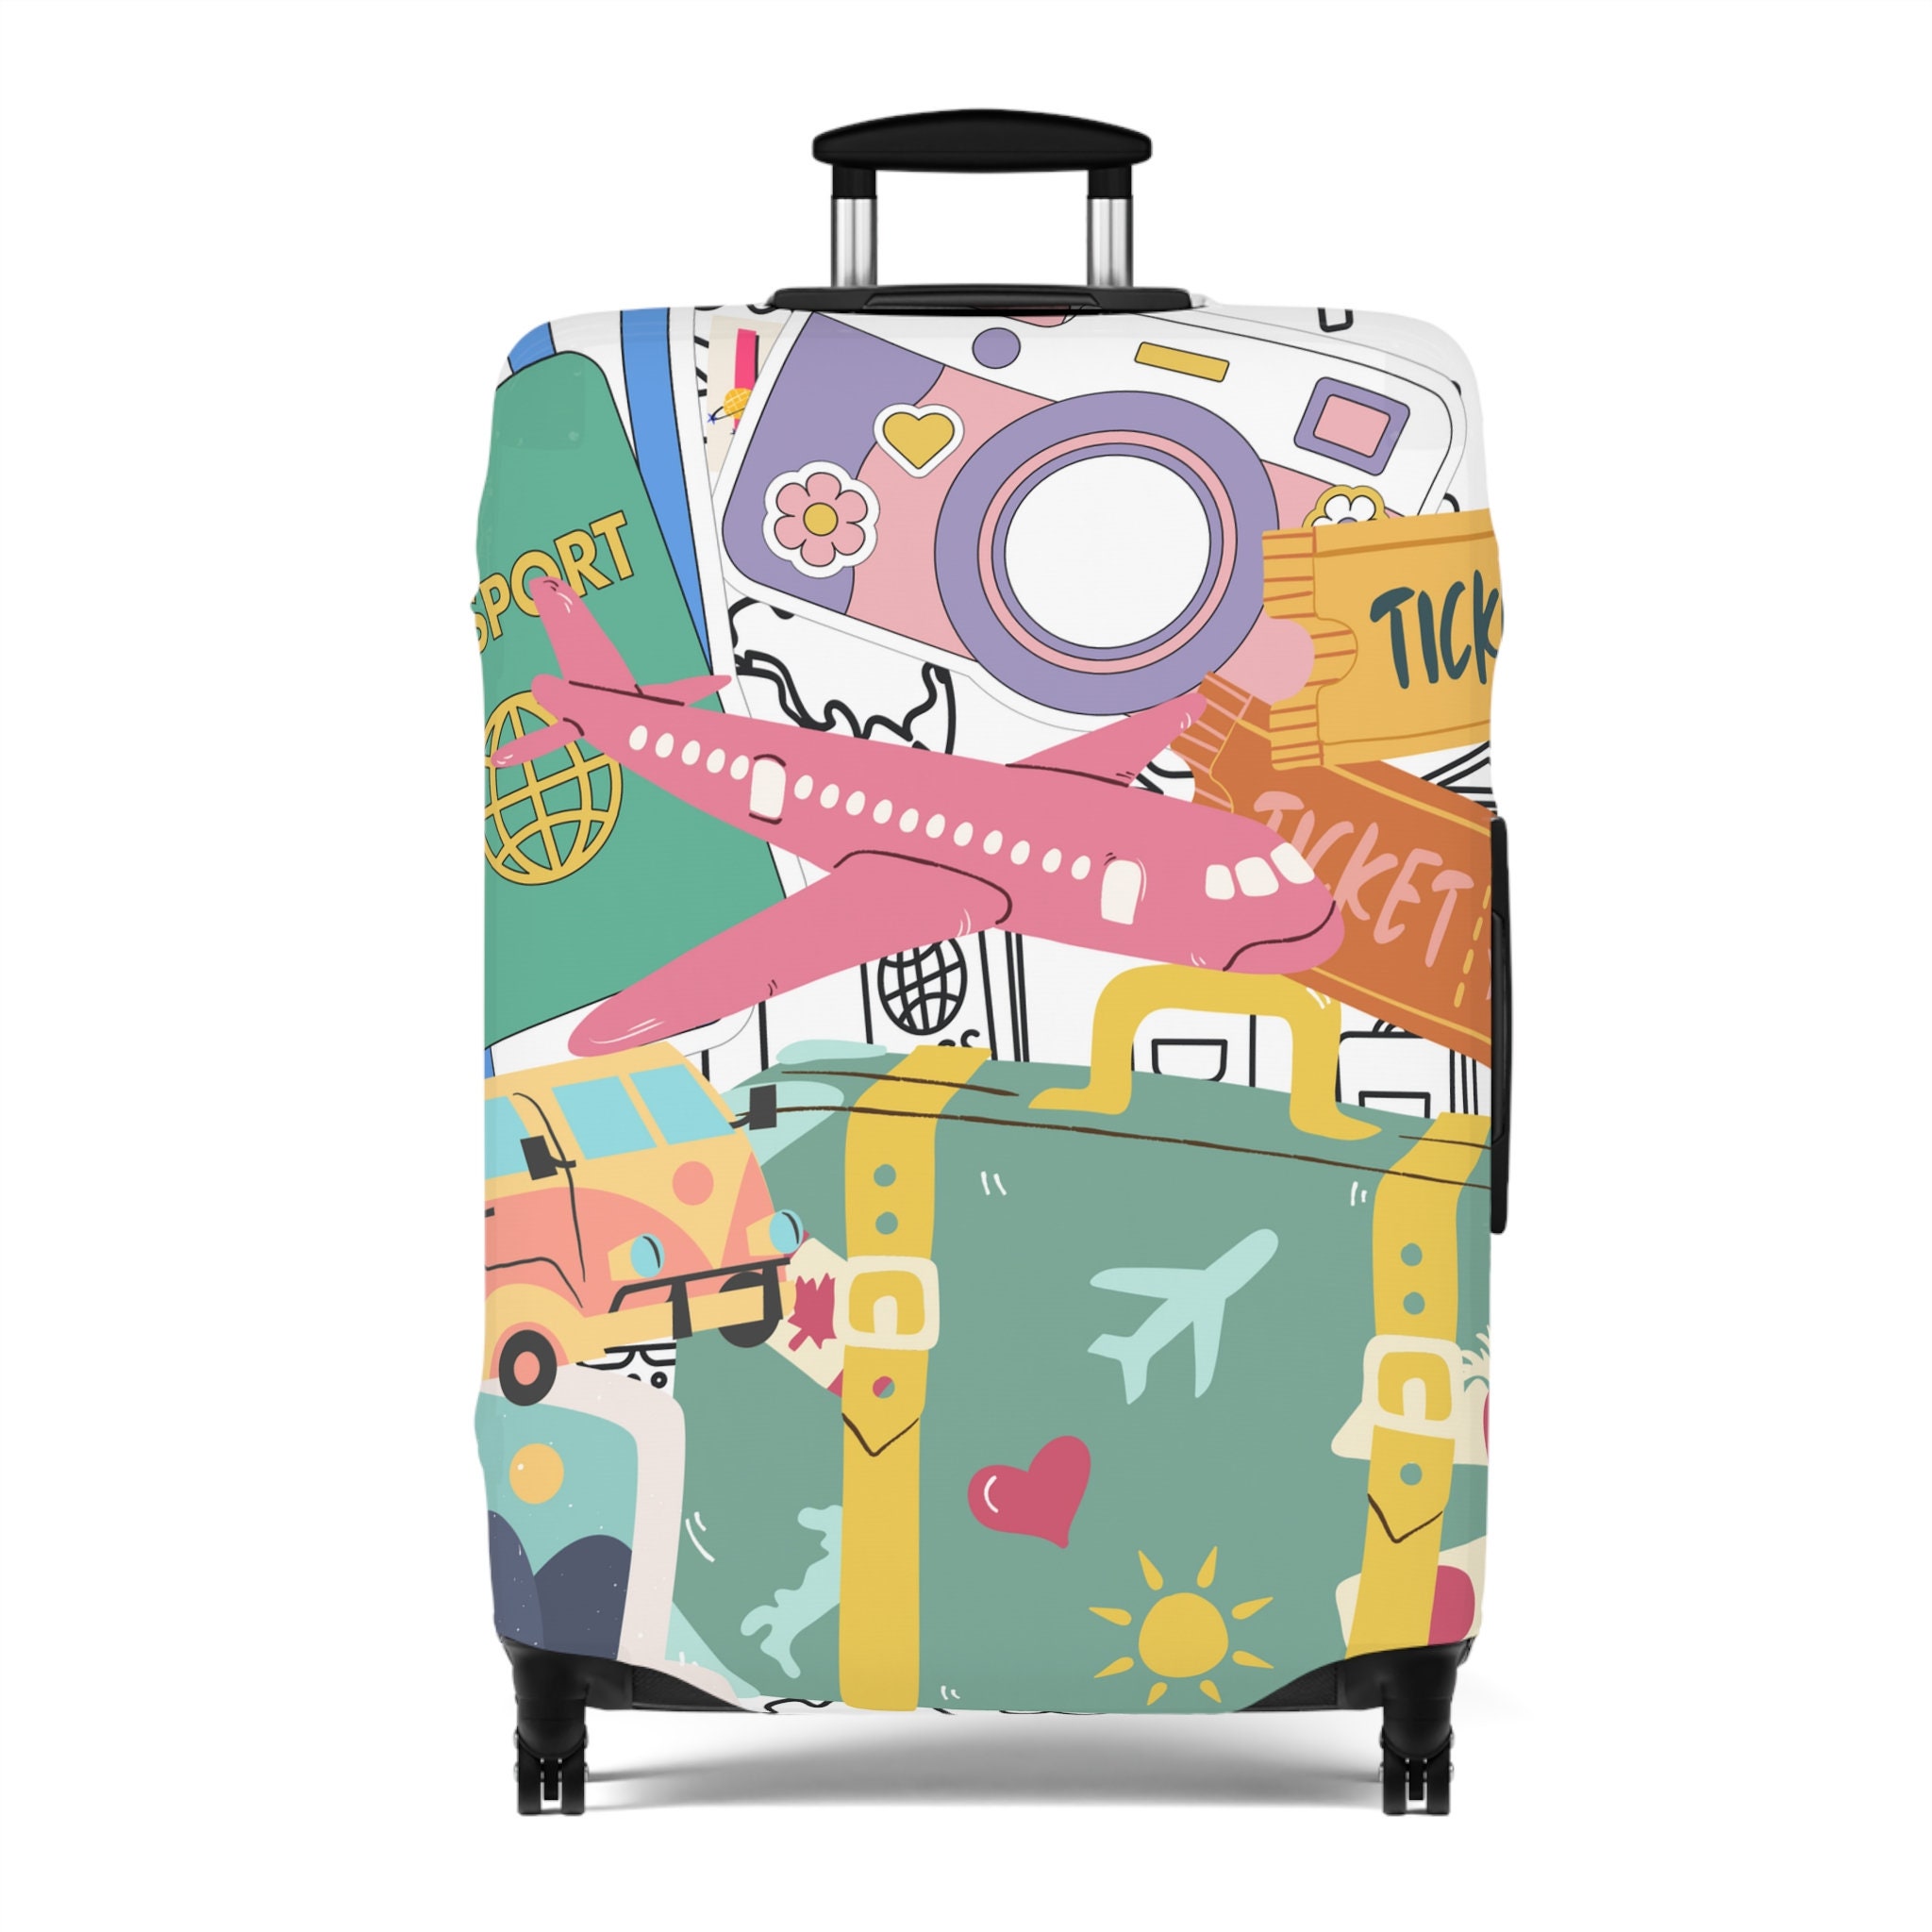 Travel Inspired Luggage Cover, Trip Vacation Gifts